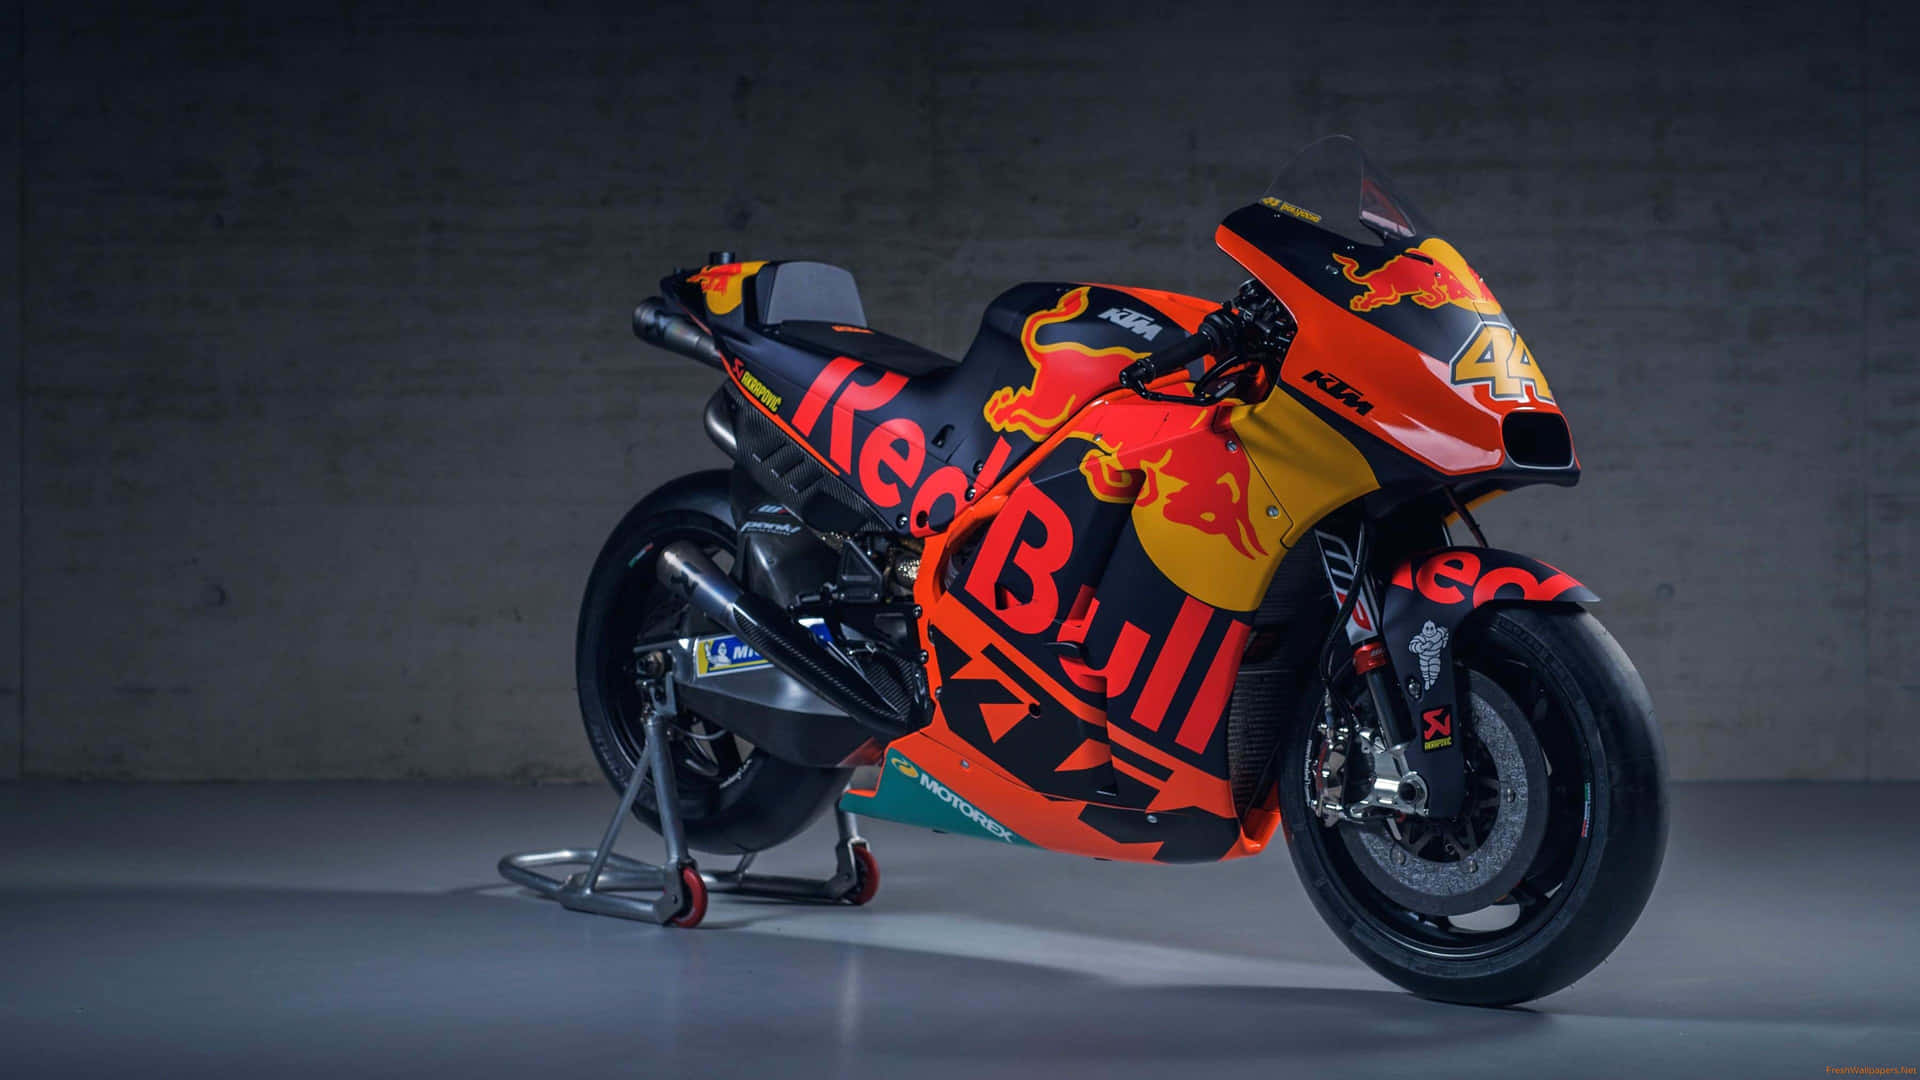 Discover the Beauty of Riding a KTM bike